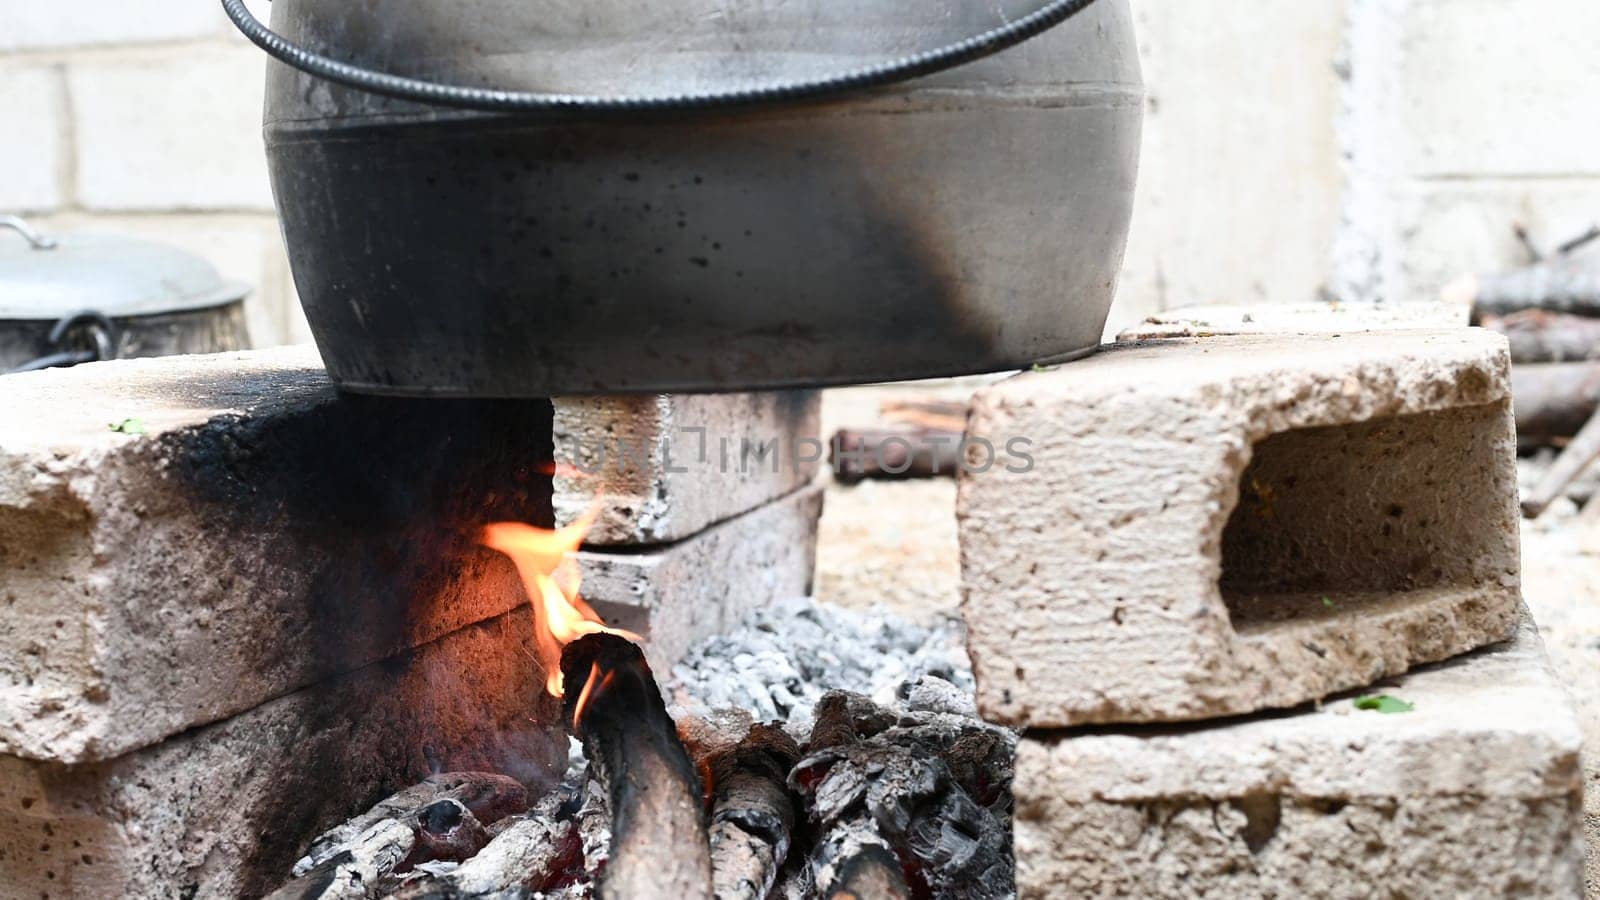 Holiday food fire cooking pot firewood. Preparing food on fire. Cast iron pot fire wood burning in stone oven cooking background. by Peruphotoart